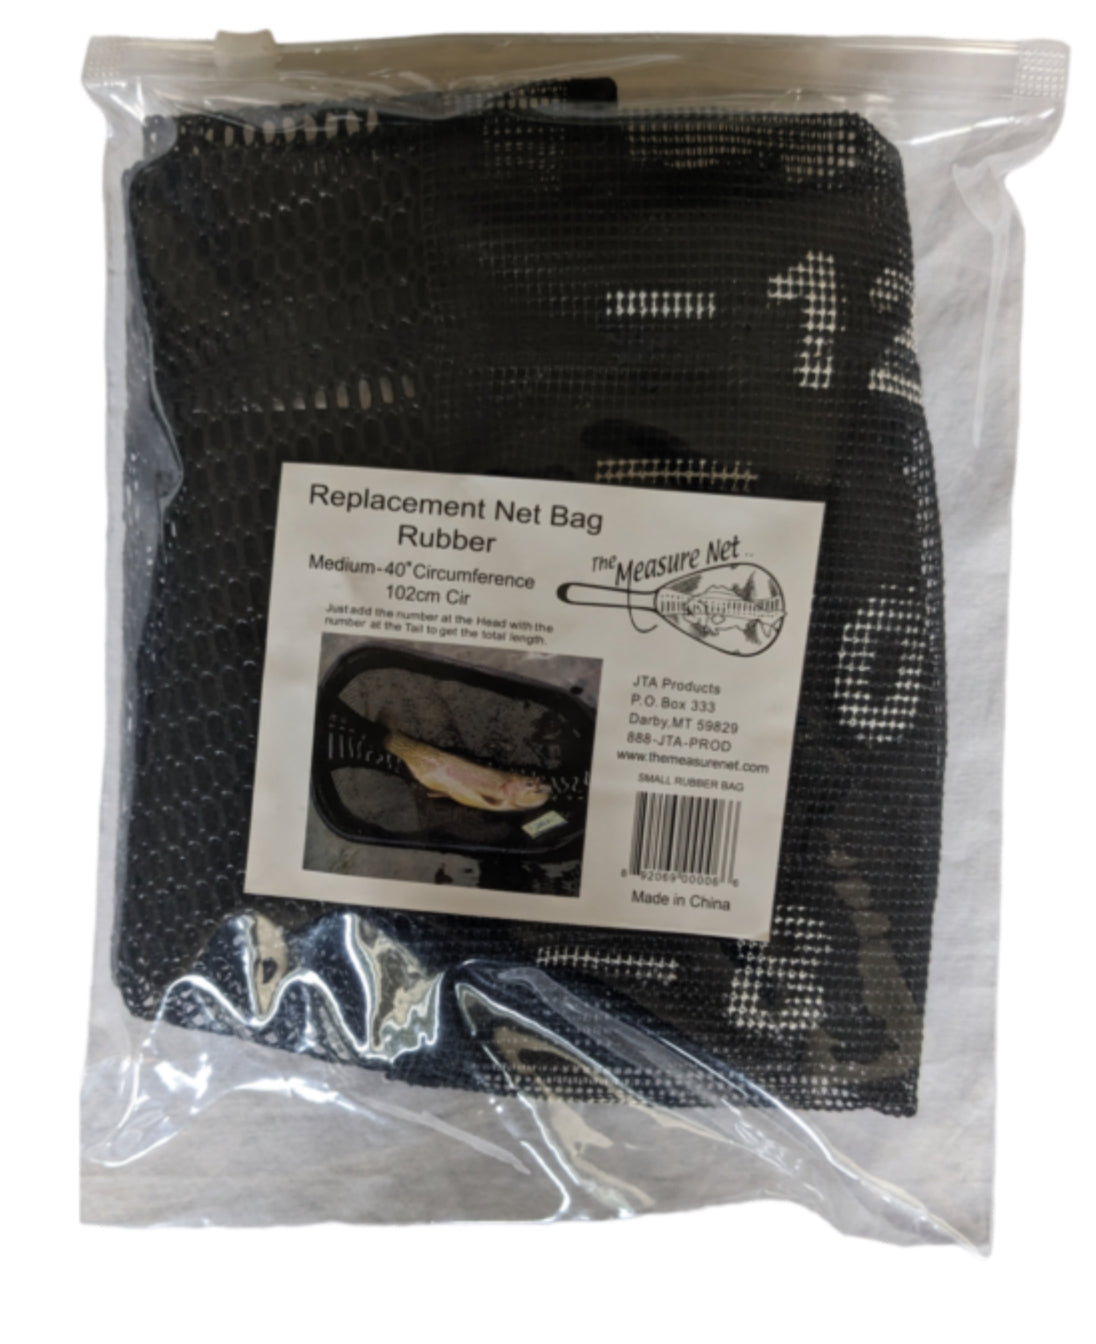 The Measure Net Replacement Net Bag